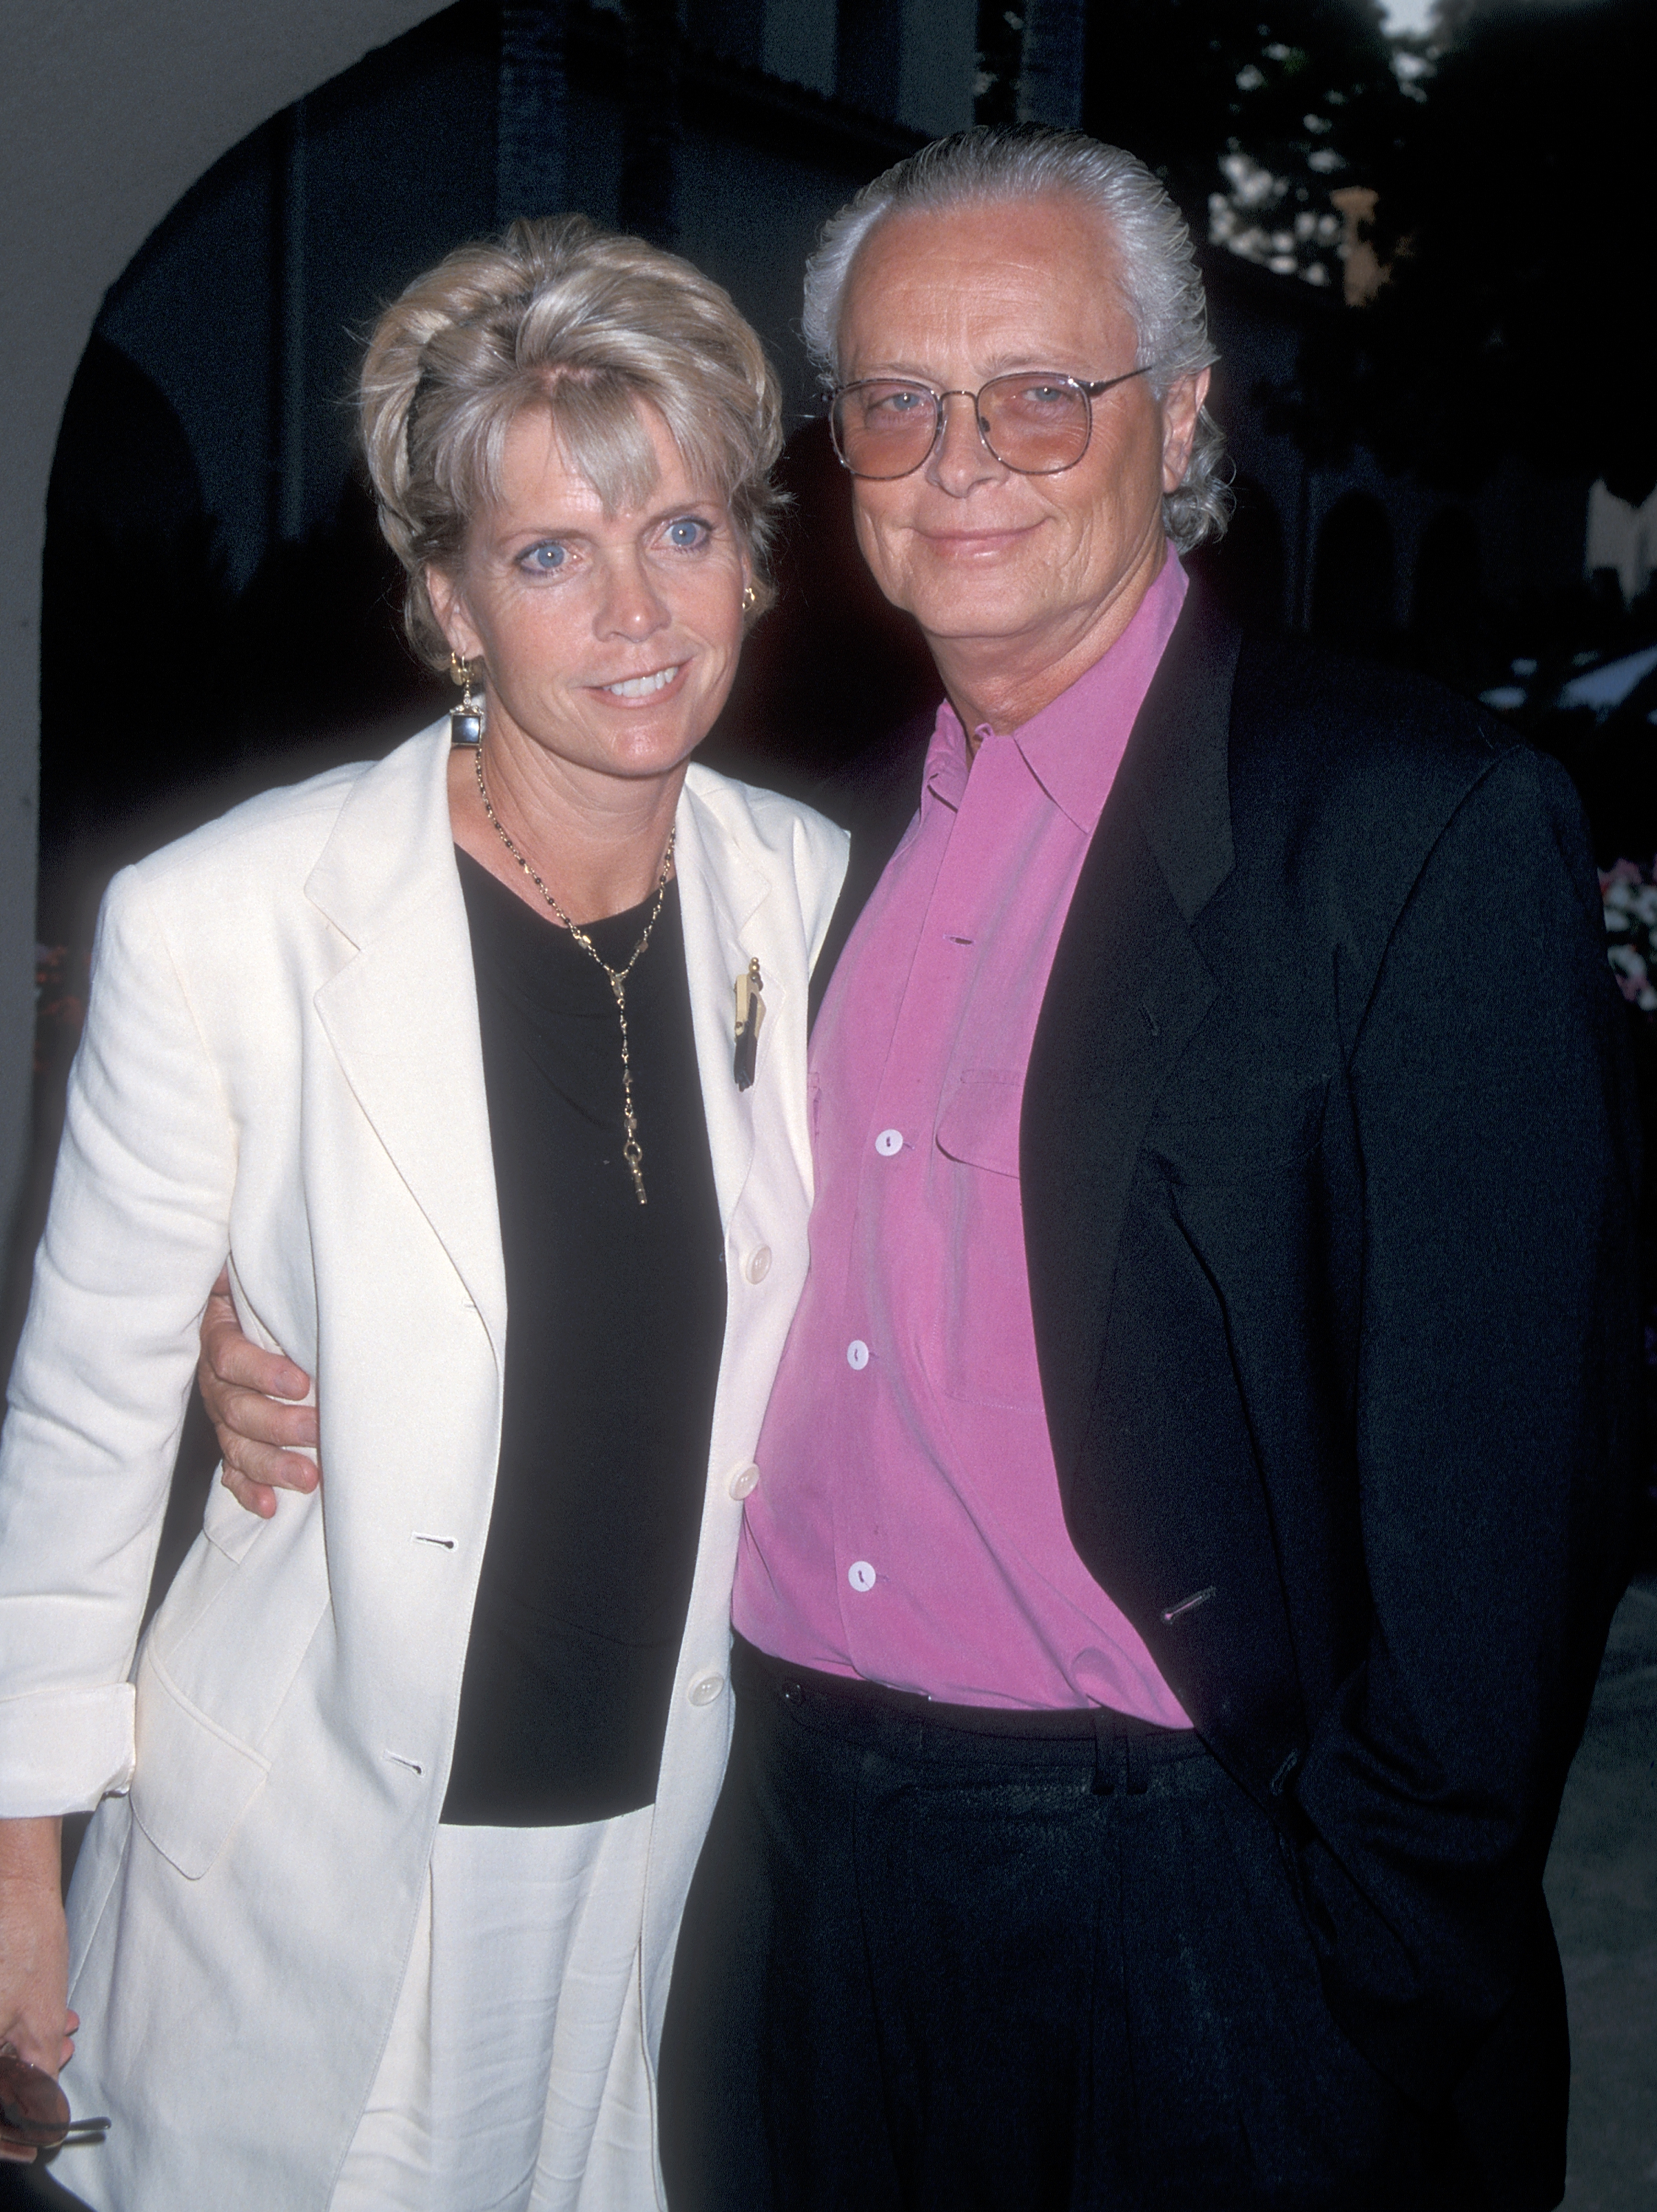 Actress Meredith Baxter and husband actor Michael Blodgett attend the CBS Summer TCA Press Tour on July 24, 1998 at the Ritz-Carlton Hotel in Pasadena, California. | Source: Getty Images